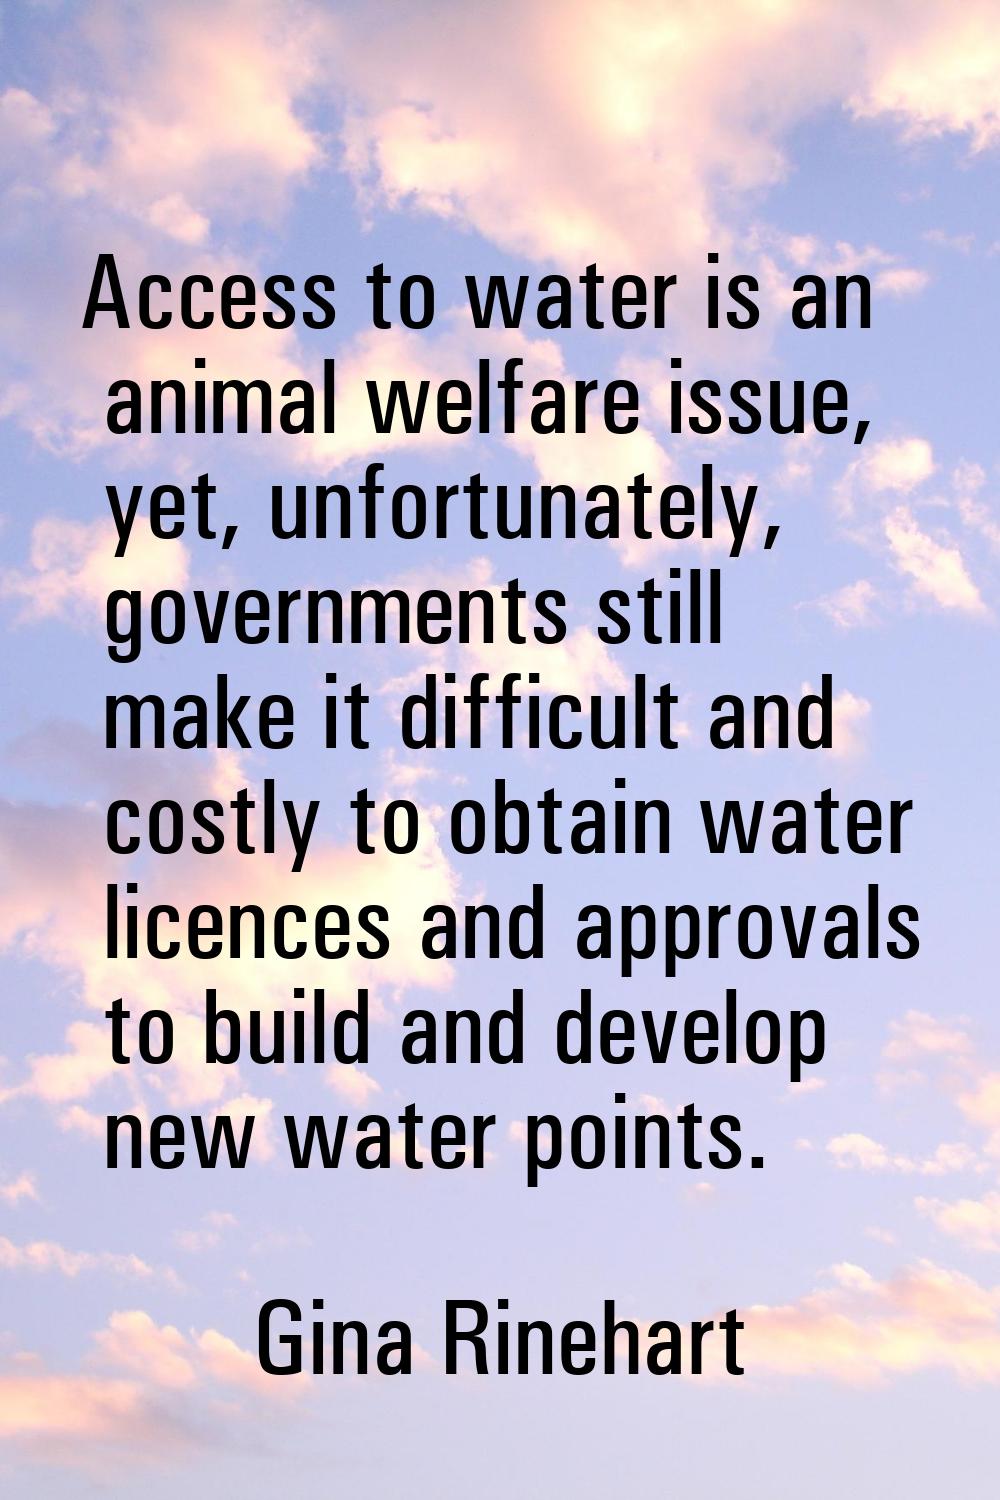 Access to water is an animal welfare issue, yet, unfortunately, governments still make it difficult